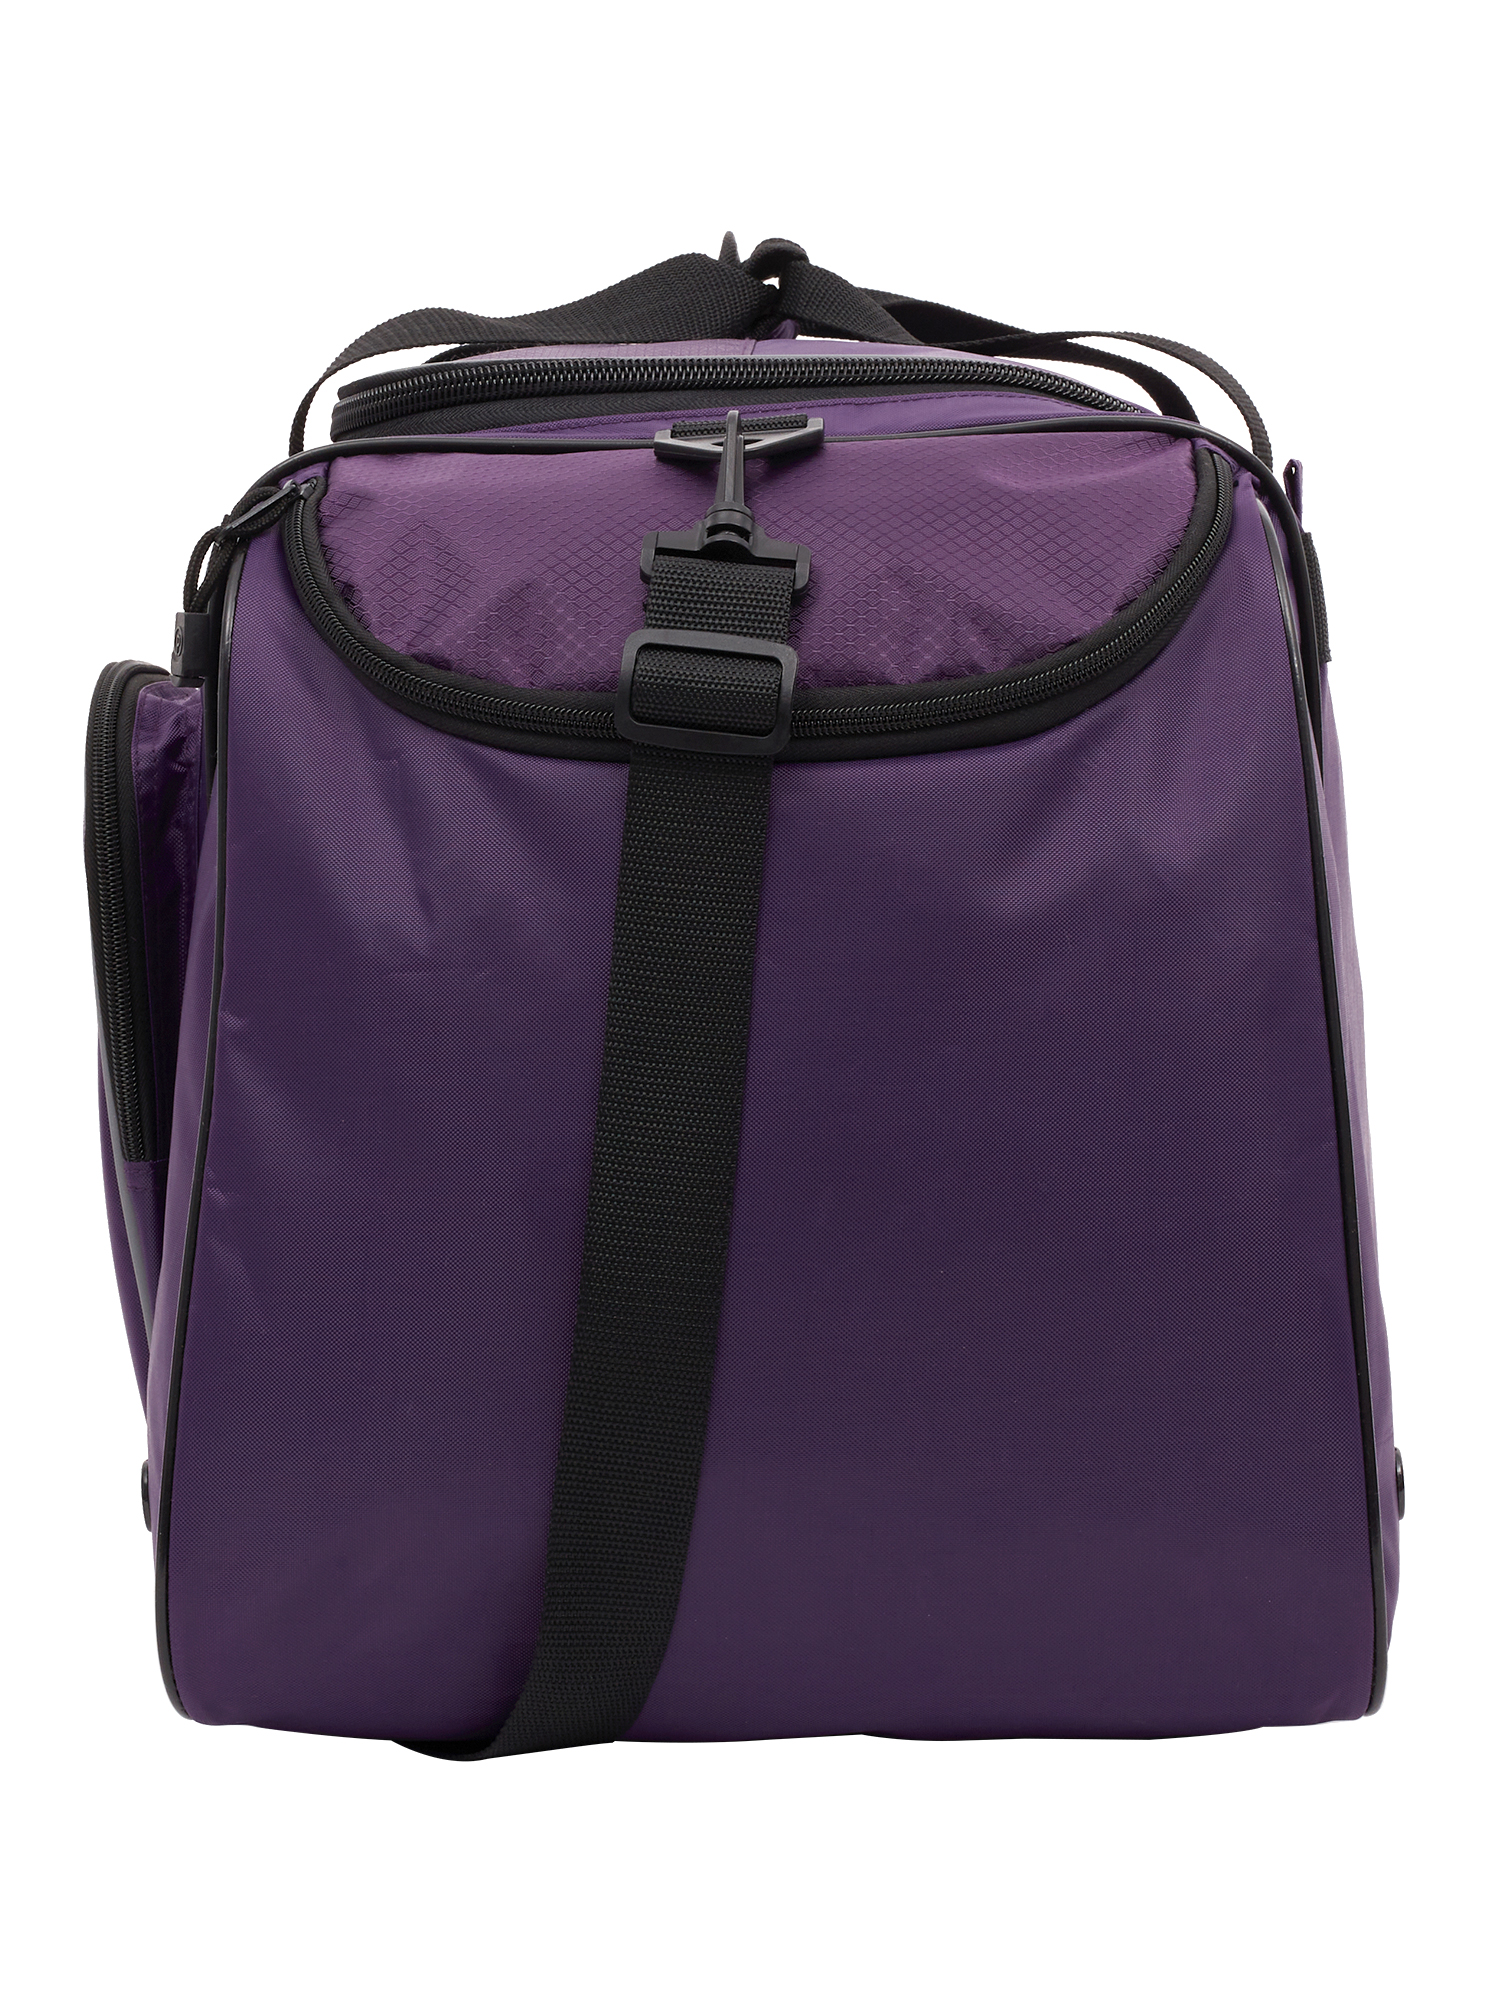 Protege 28" Polyester Sport Travel Duffel Bag, Purple - image 4 of 8